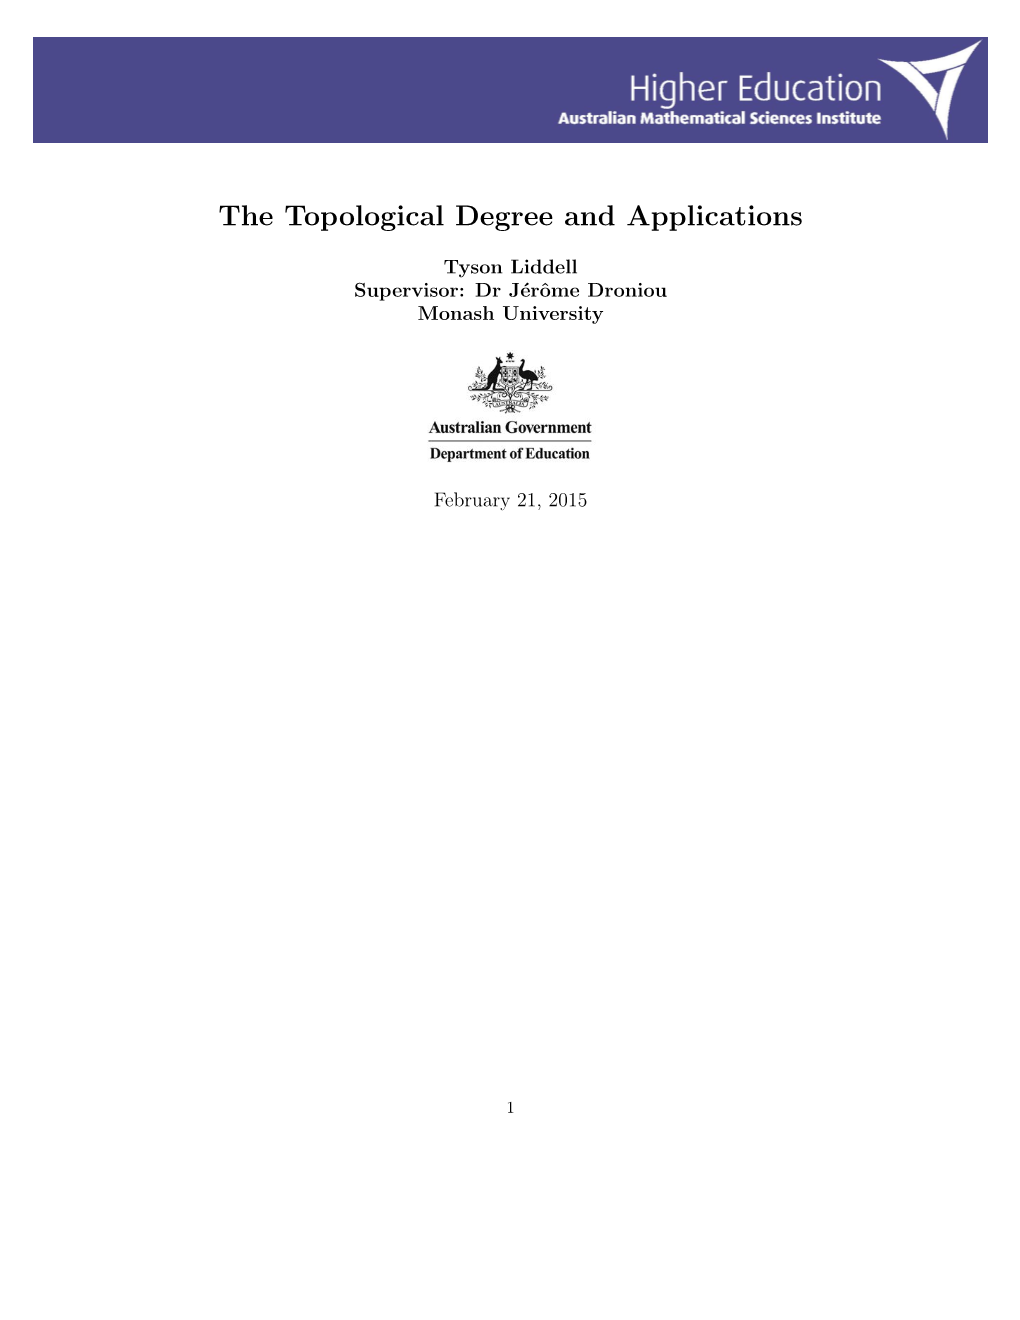 The Topological Degree and Applications